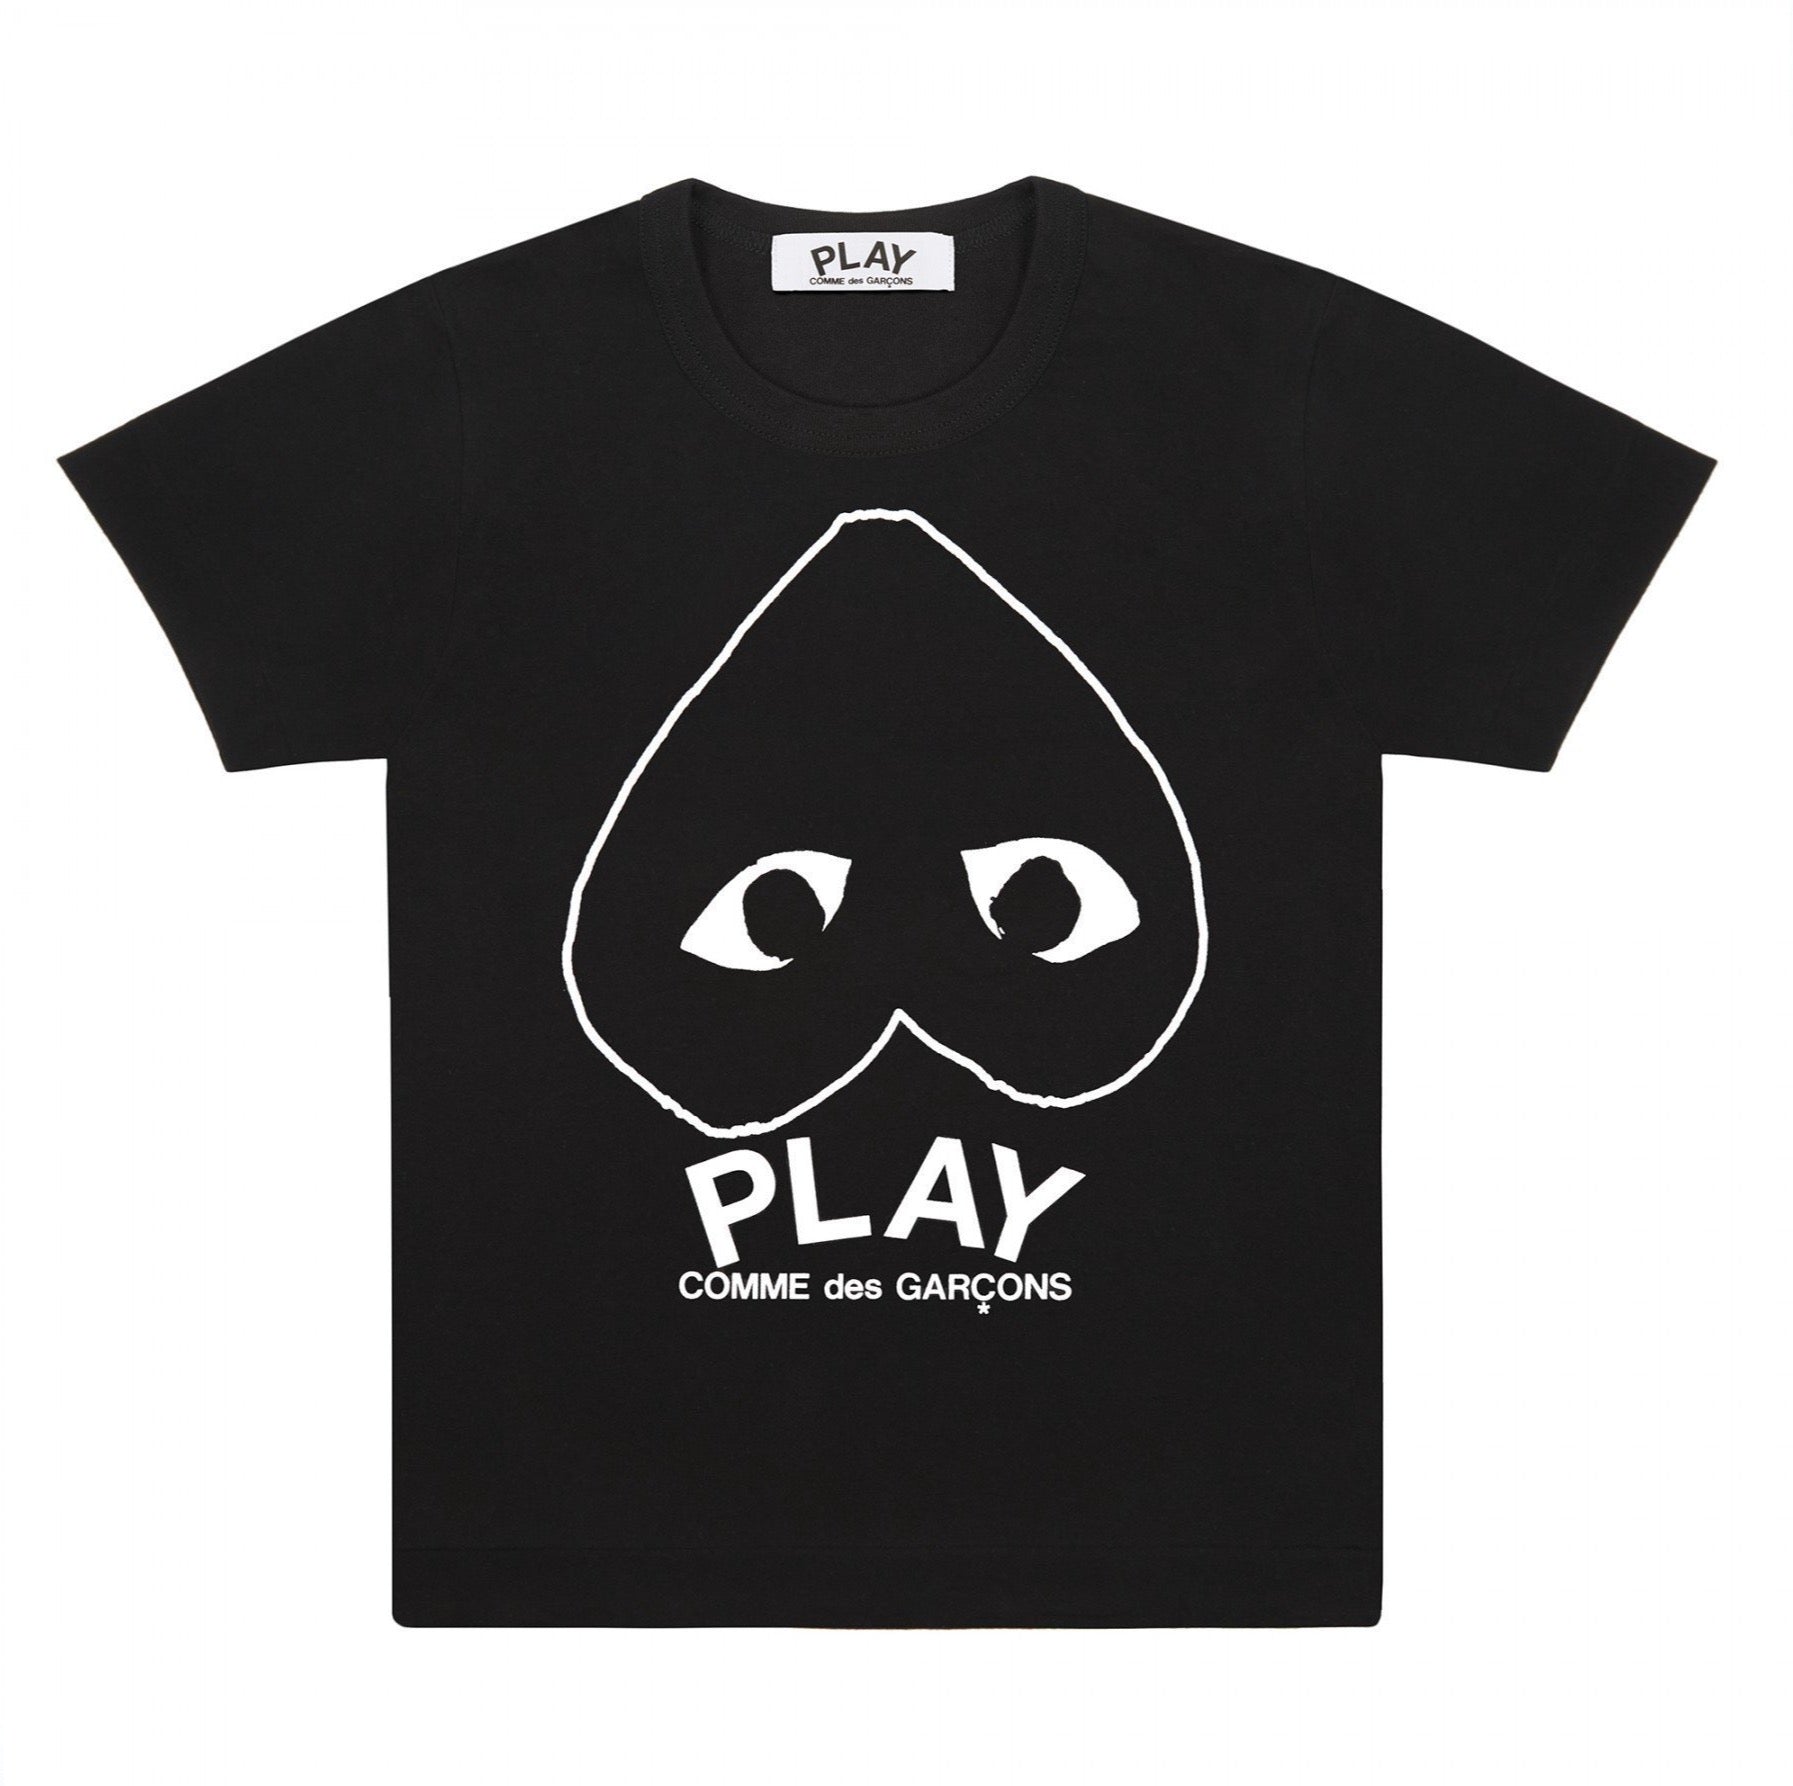 PLAY Black T-Shirt with White Heart Outline